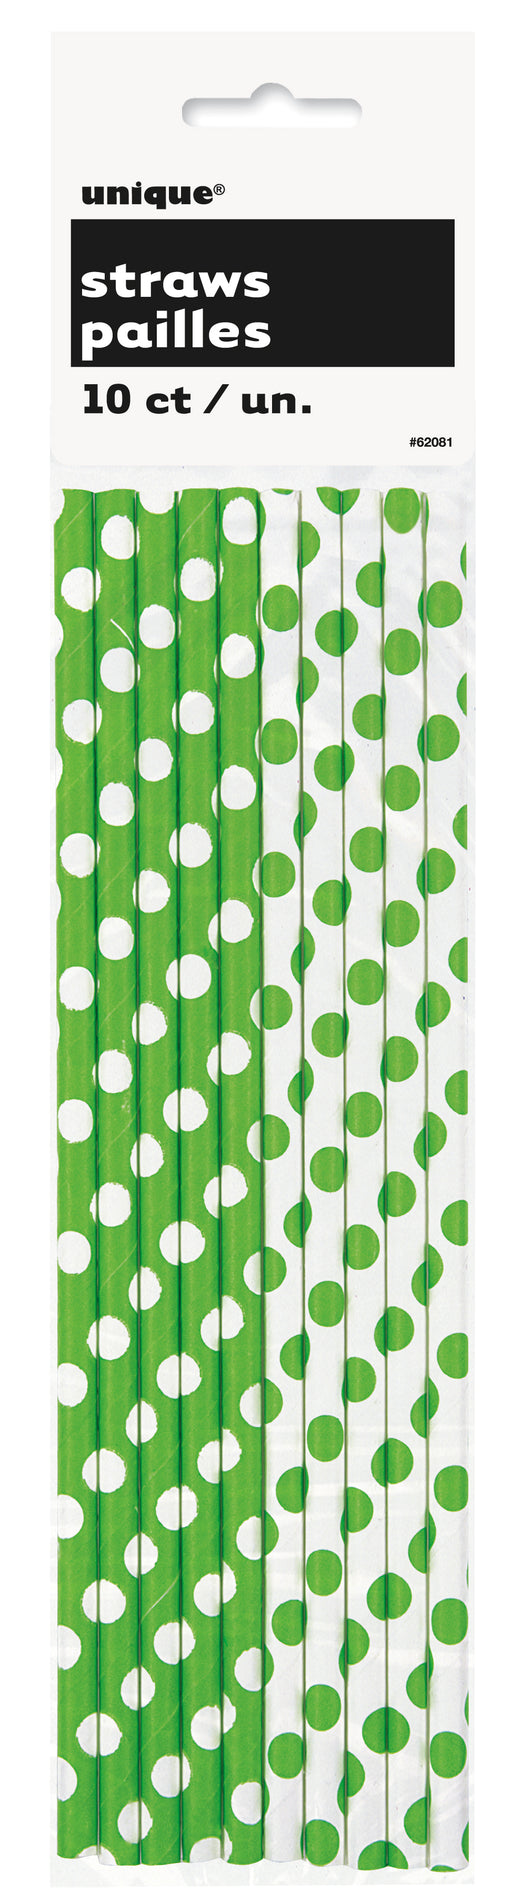 Paper Straws - Green & White. - The Ultimate Balloon & Party Shop